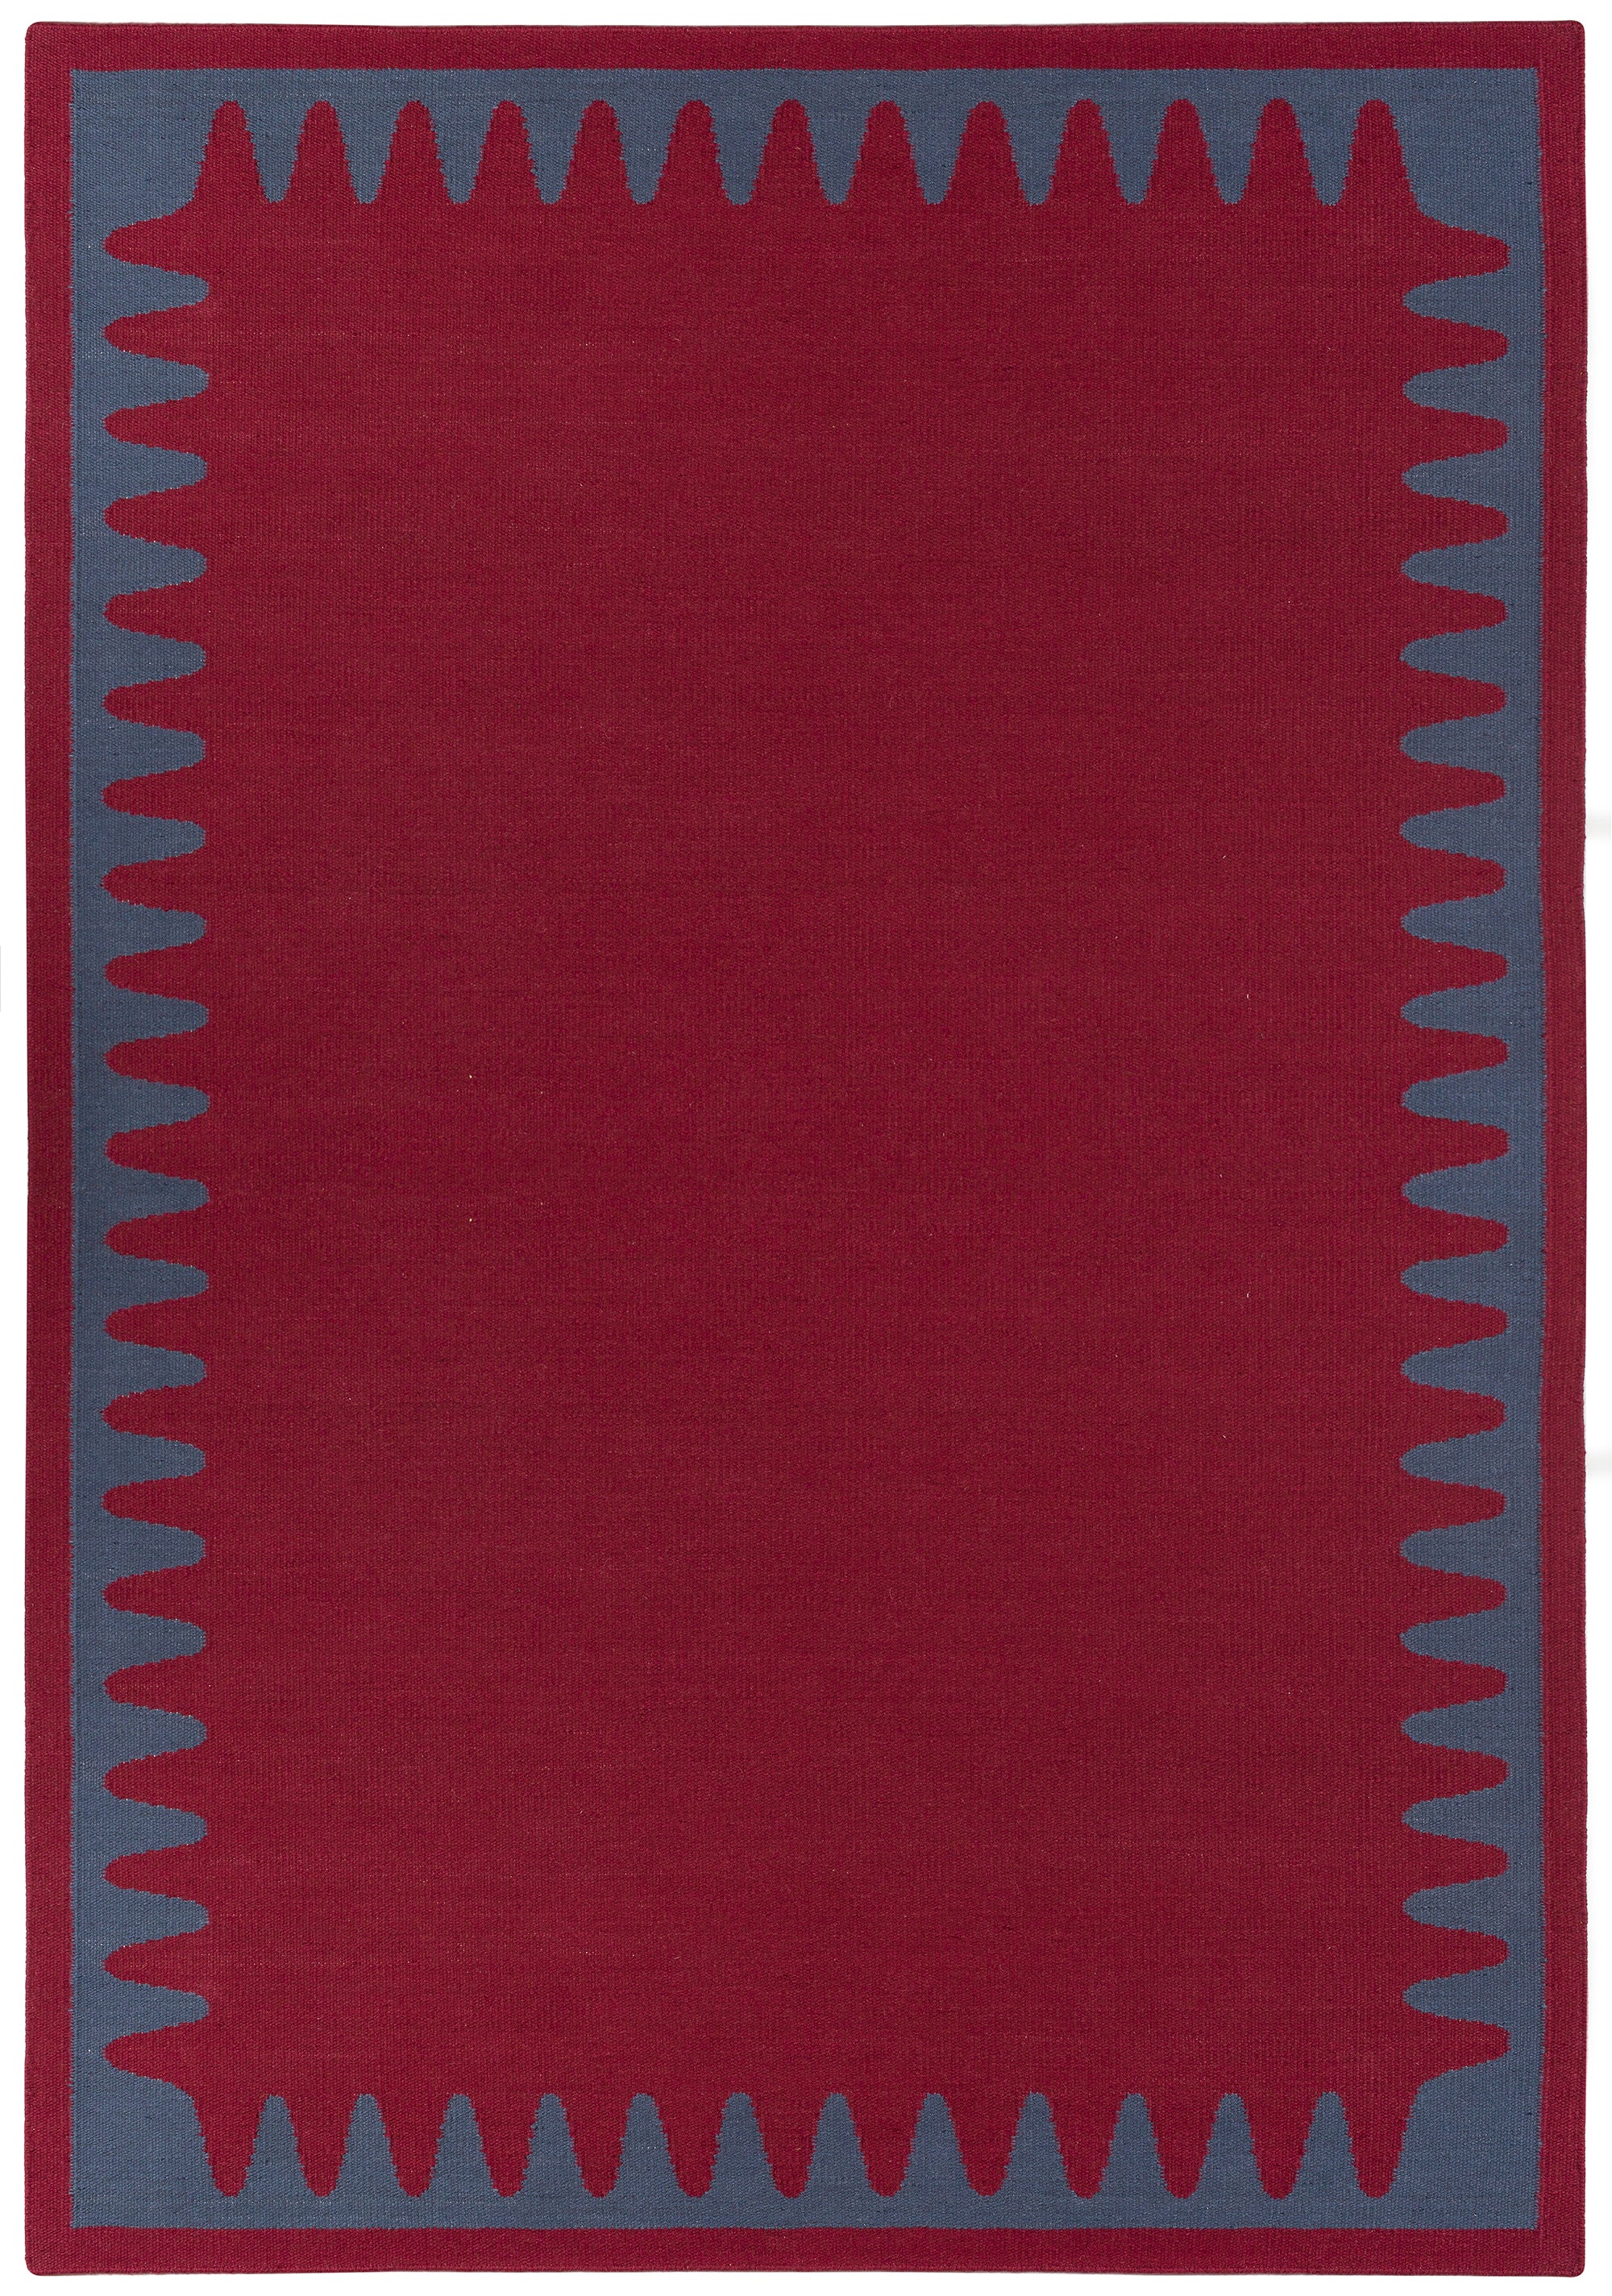 Waver Rug in Queensdown Red, a solid red field with a blue flame stitch border. 